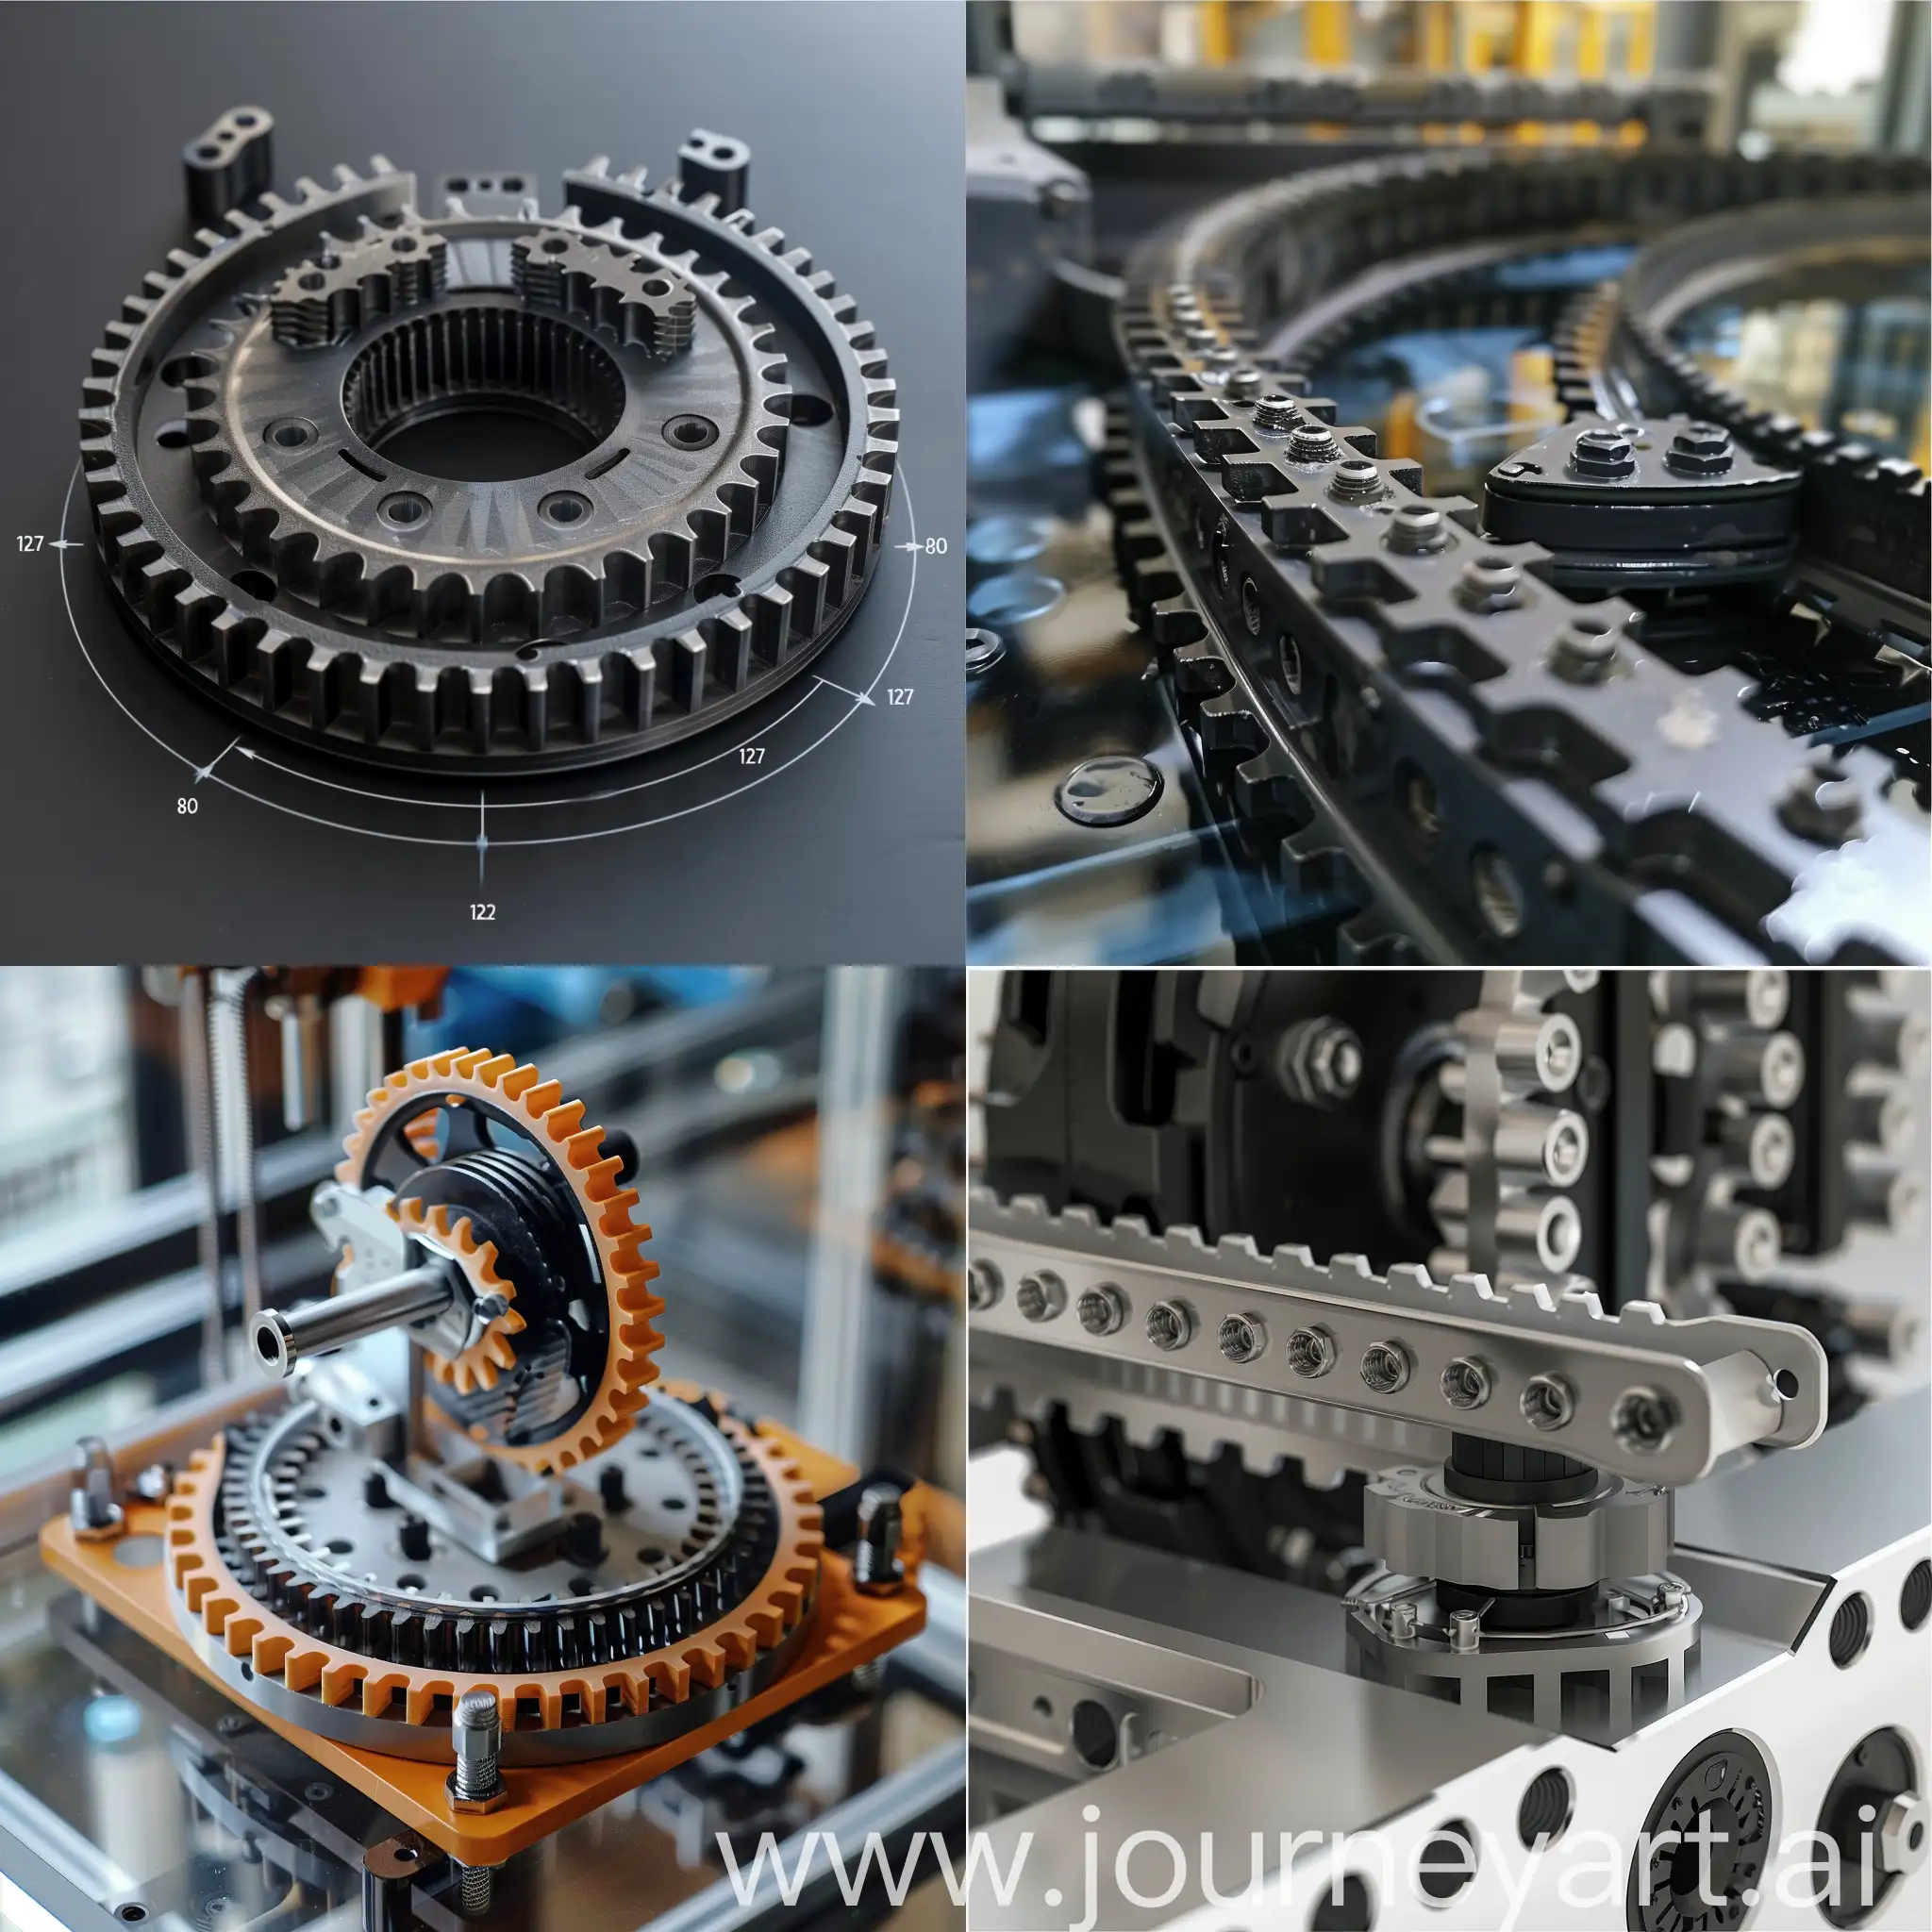 Synchronous-Belt-Transmission-Model-with-80mm-Diameter-Pulley-and-22-Teeth